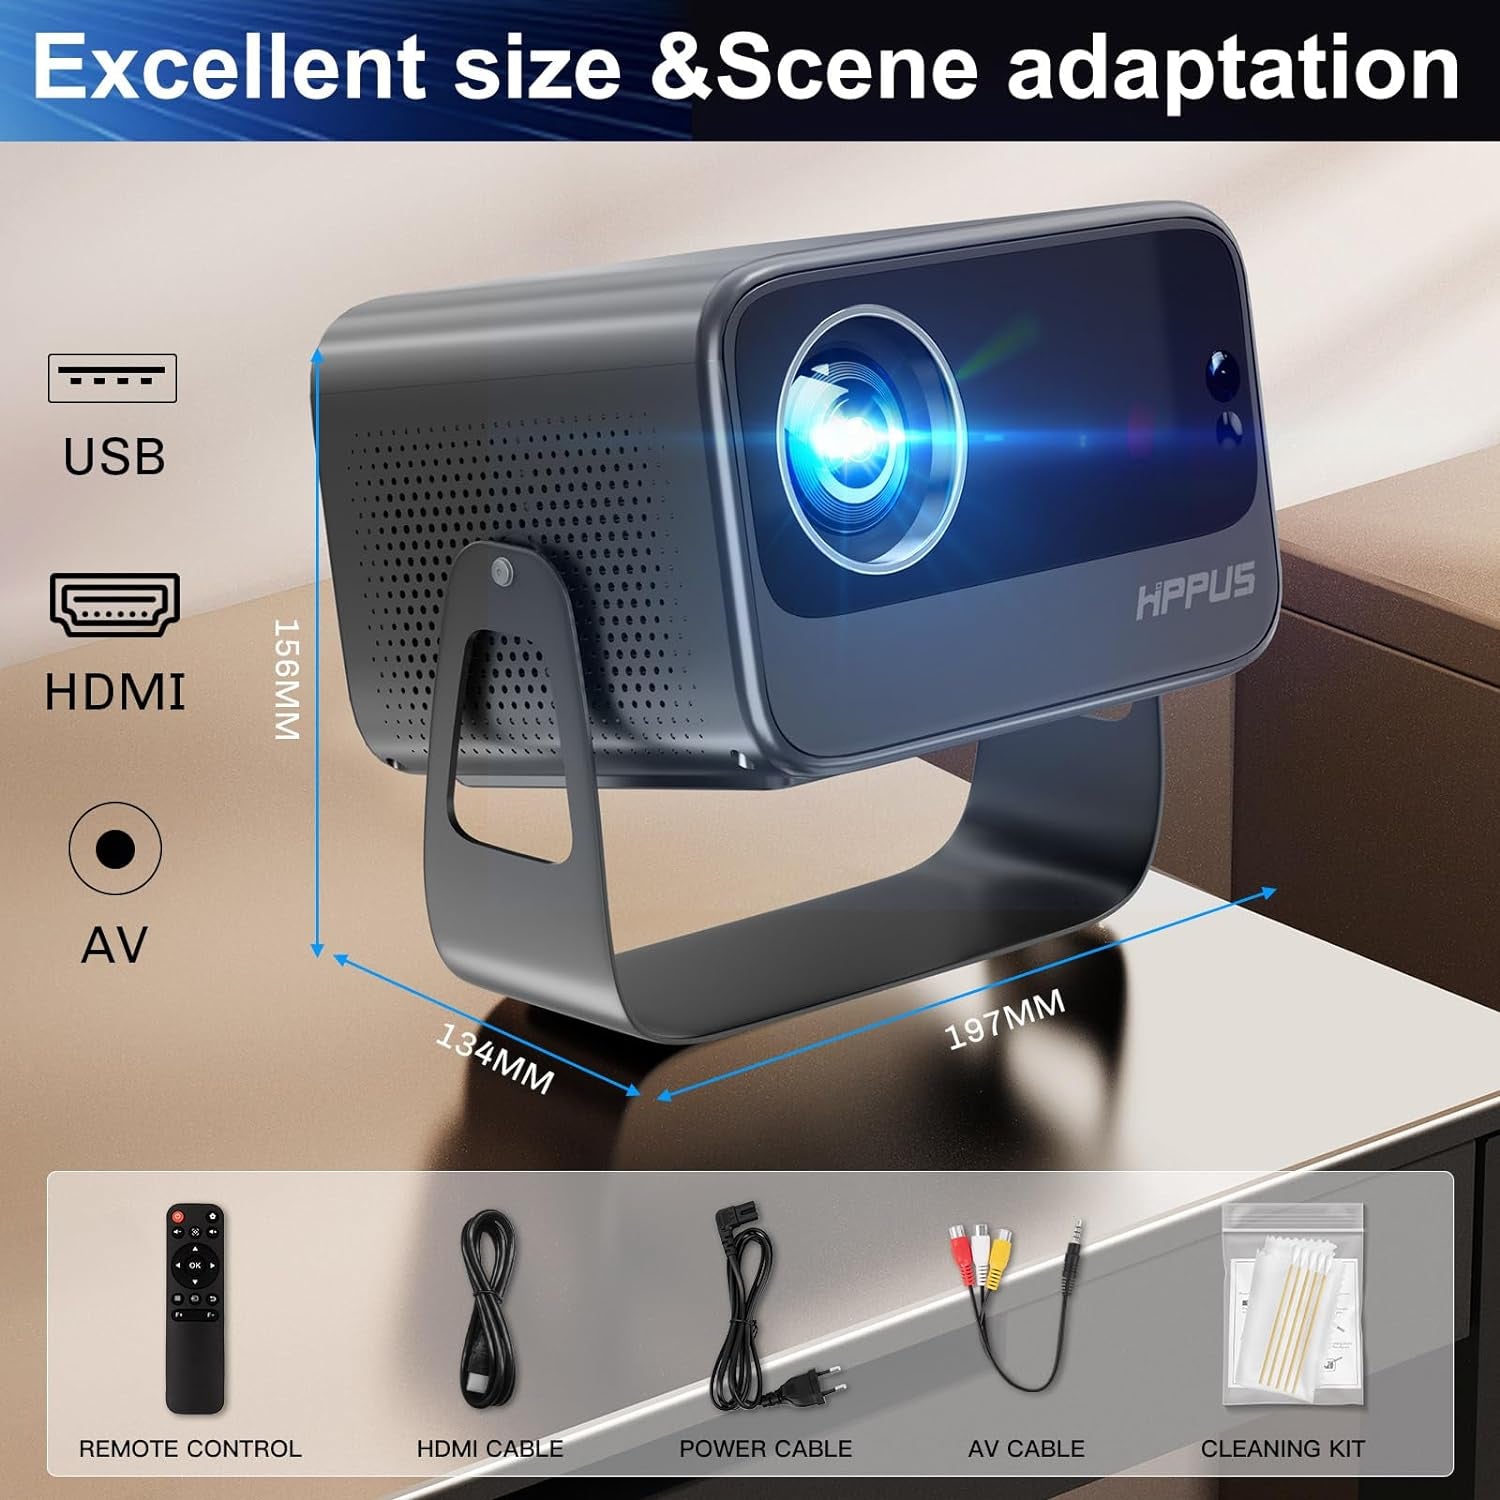 [Auto Focus/Keystone] Smart Projector 4K with Android 9.0 1080P Native 500 ANSI, Ceiling Projector with Wifi 6 and Bluetooth Object Avoidance, and Screen Adaption（Grey）